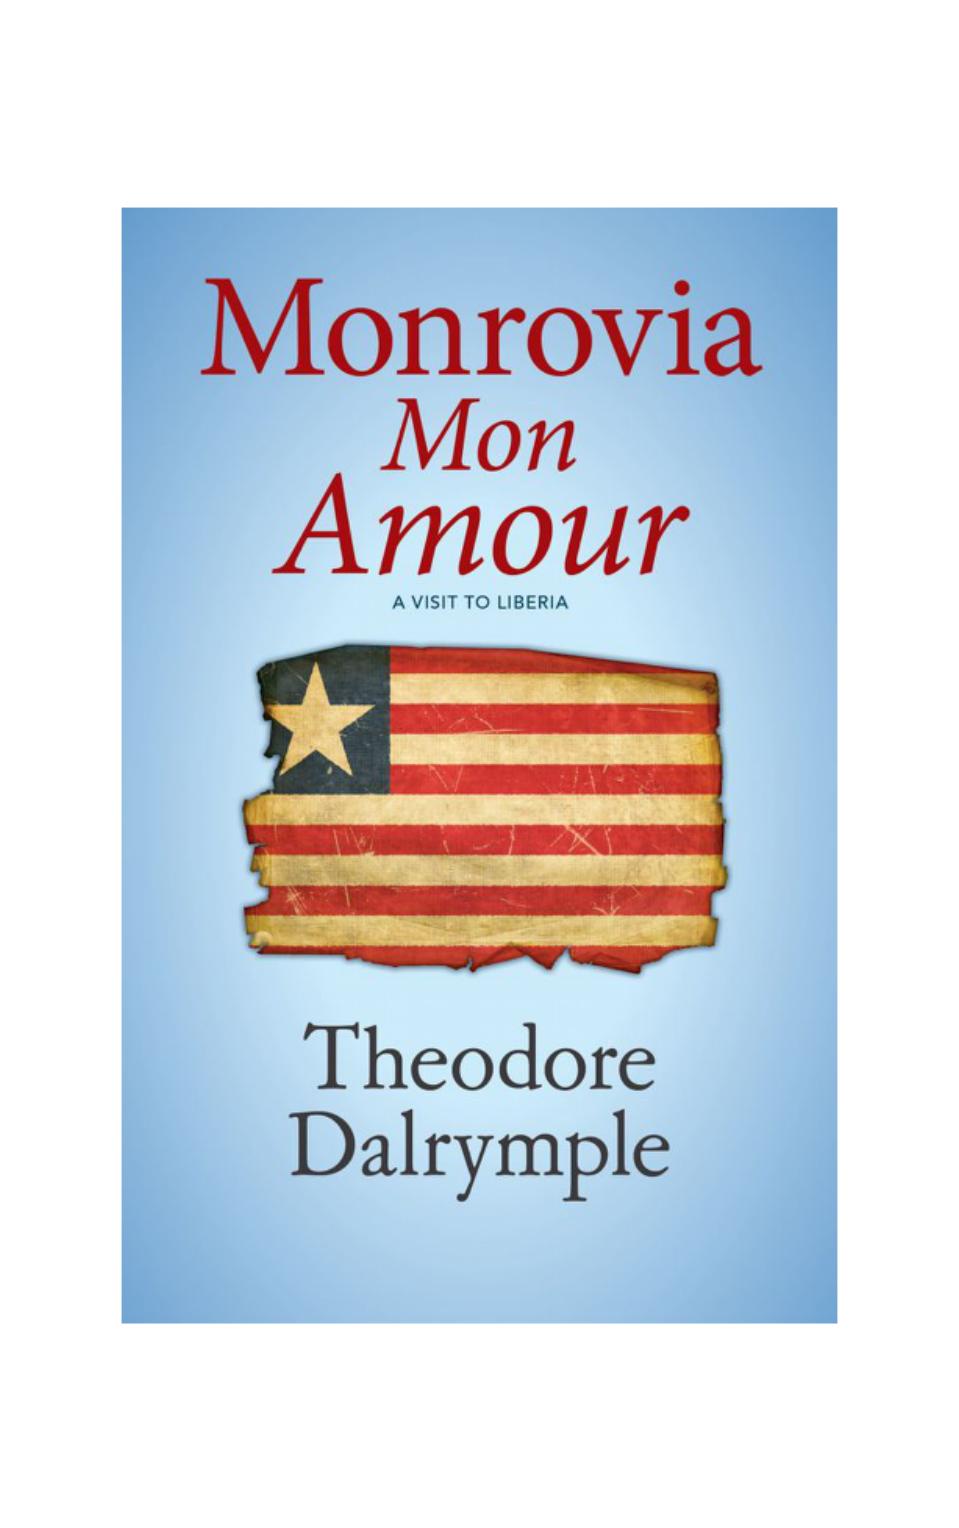 Monrovia Mon Amour: A Visit to Liberia by Theodore Dalrymple